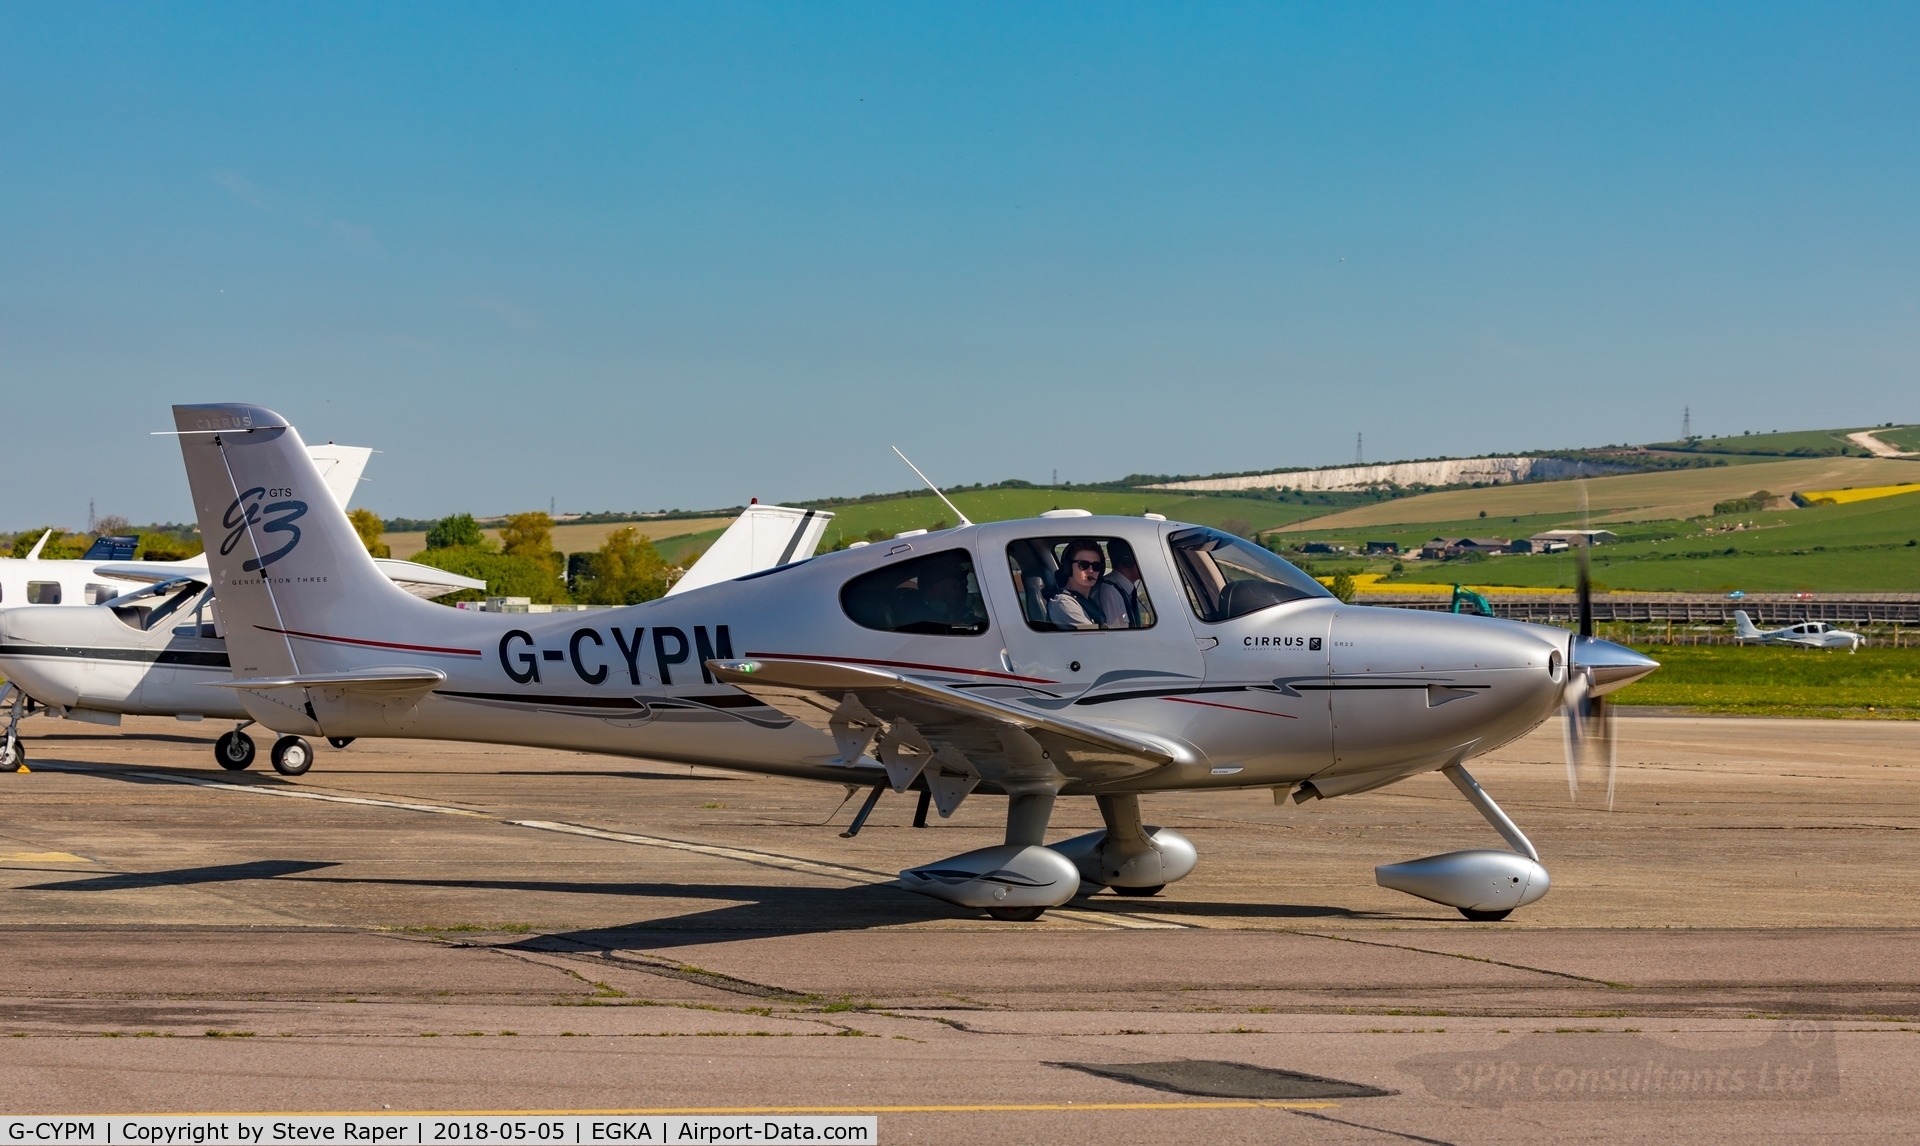 G-CYPM, 2008 Cirrus SR22 G3 GTS C/N 3185, Taxying out at Shoreham Airport